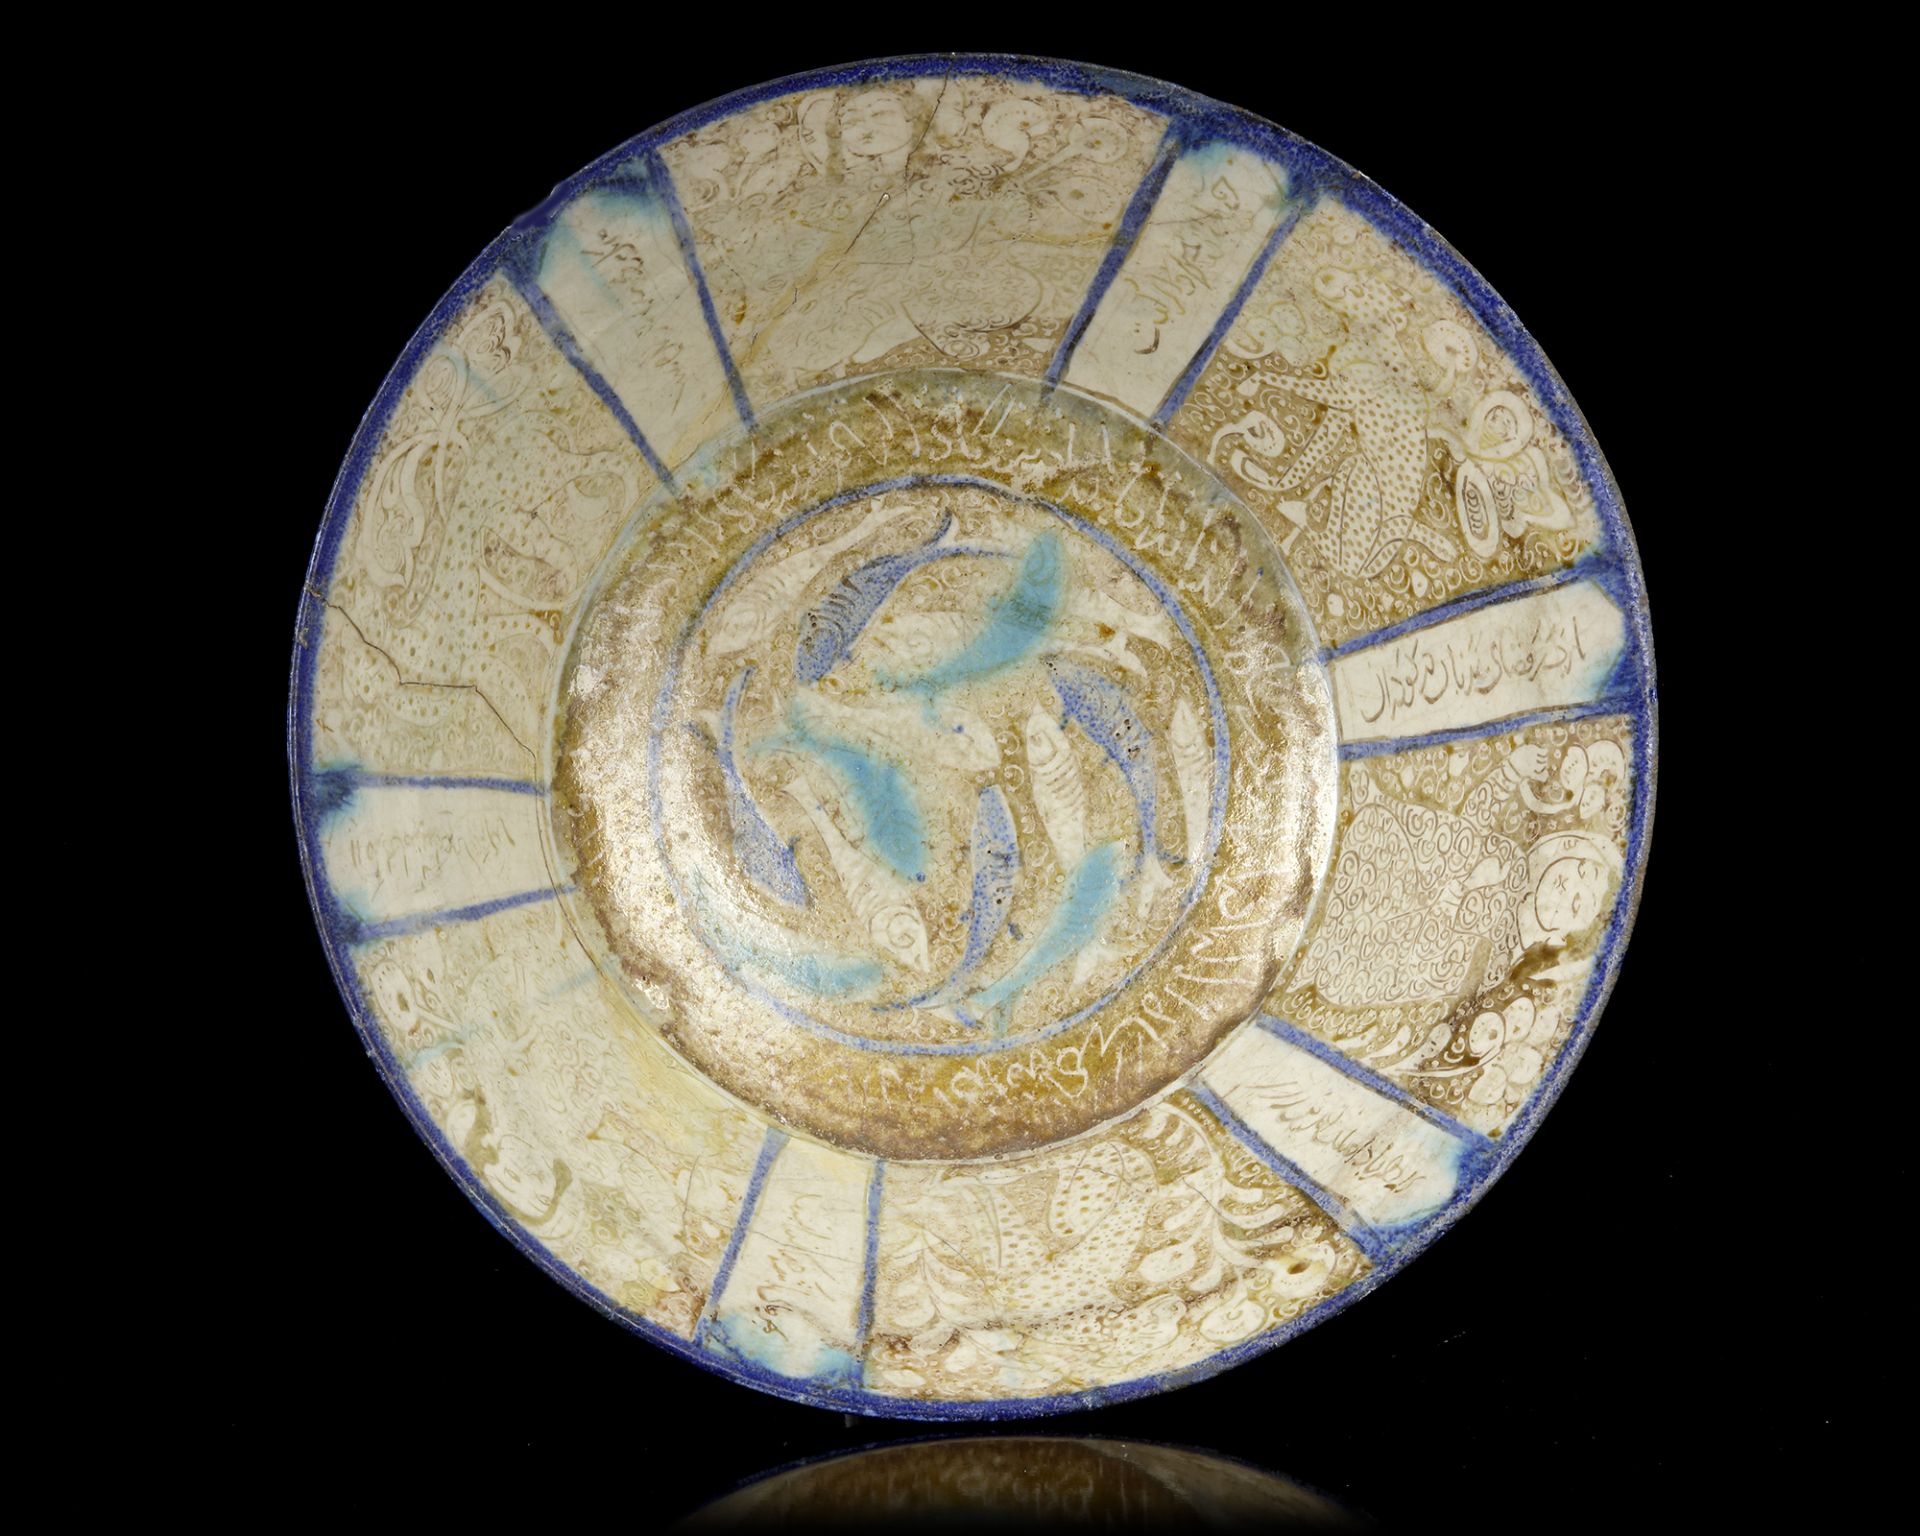 A KASHAN LUSTRE POTTERY BOWL, PERSIA, DATED 602 AH/1206 AD